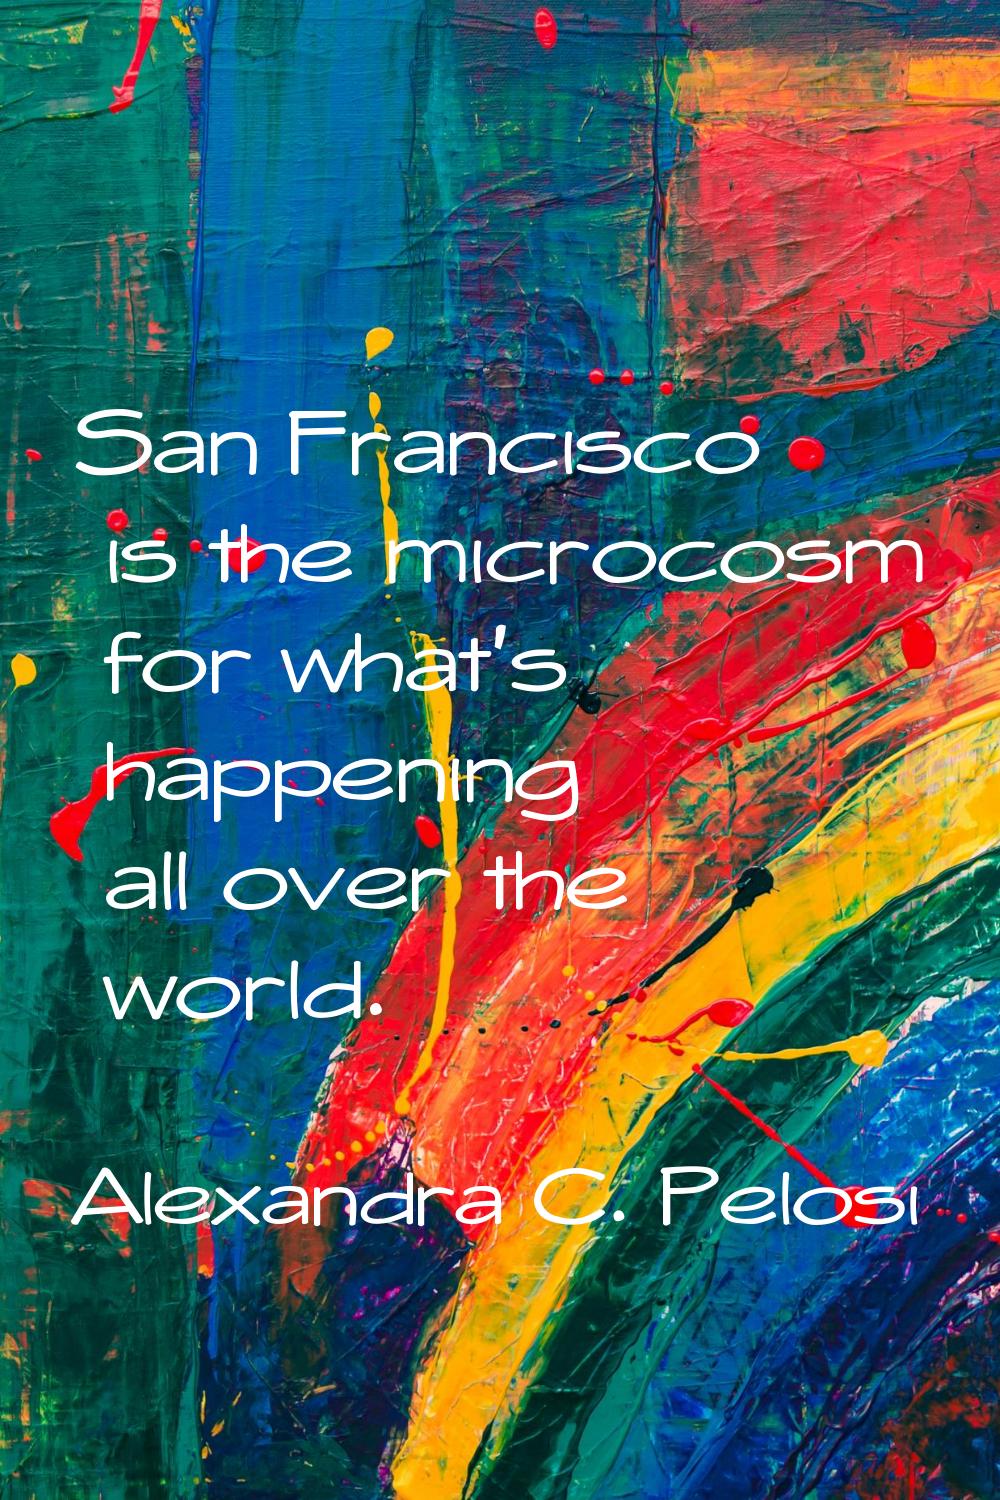 San Francisco is the microcosm for what's happening all over the world.